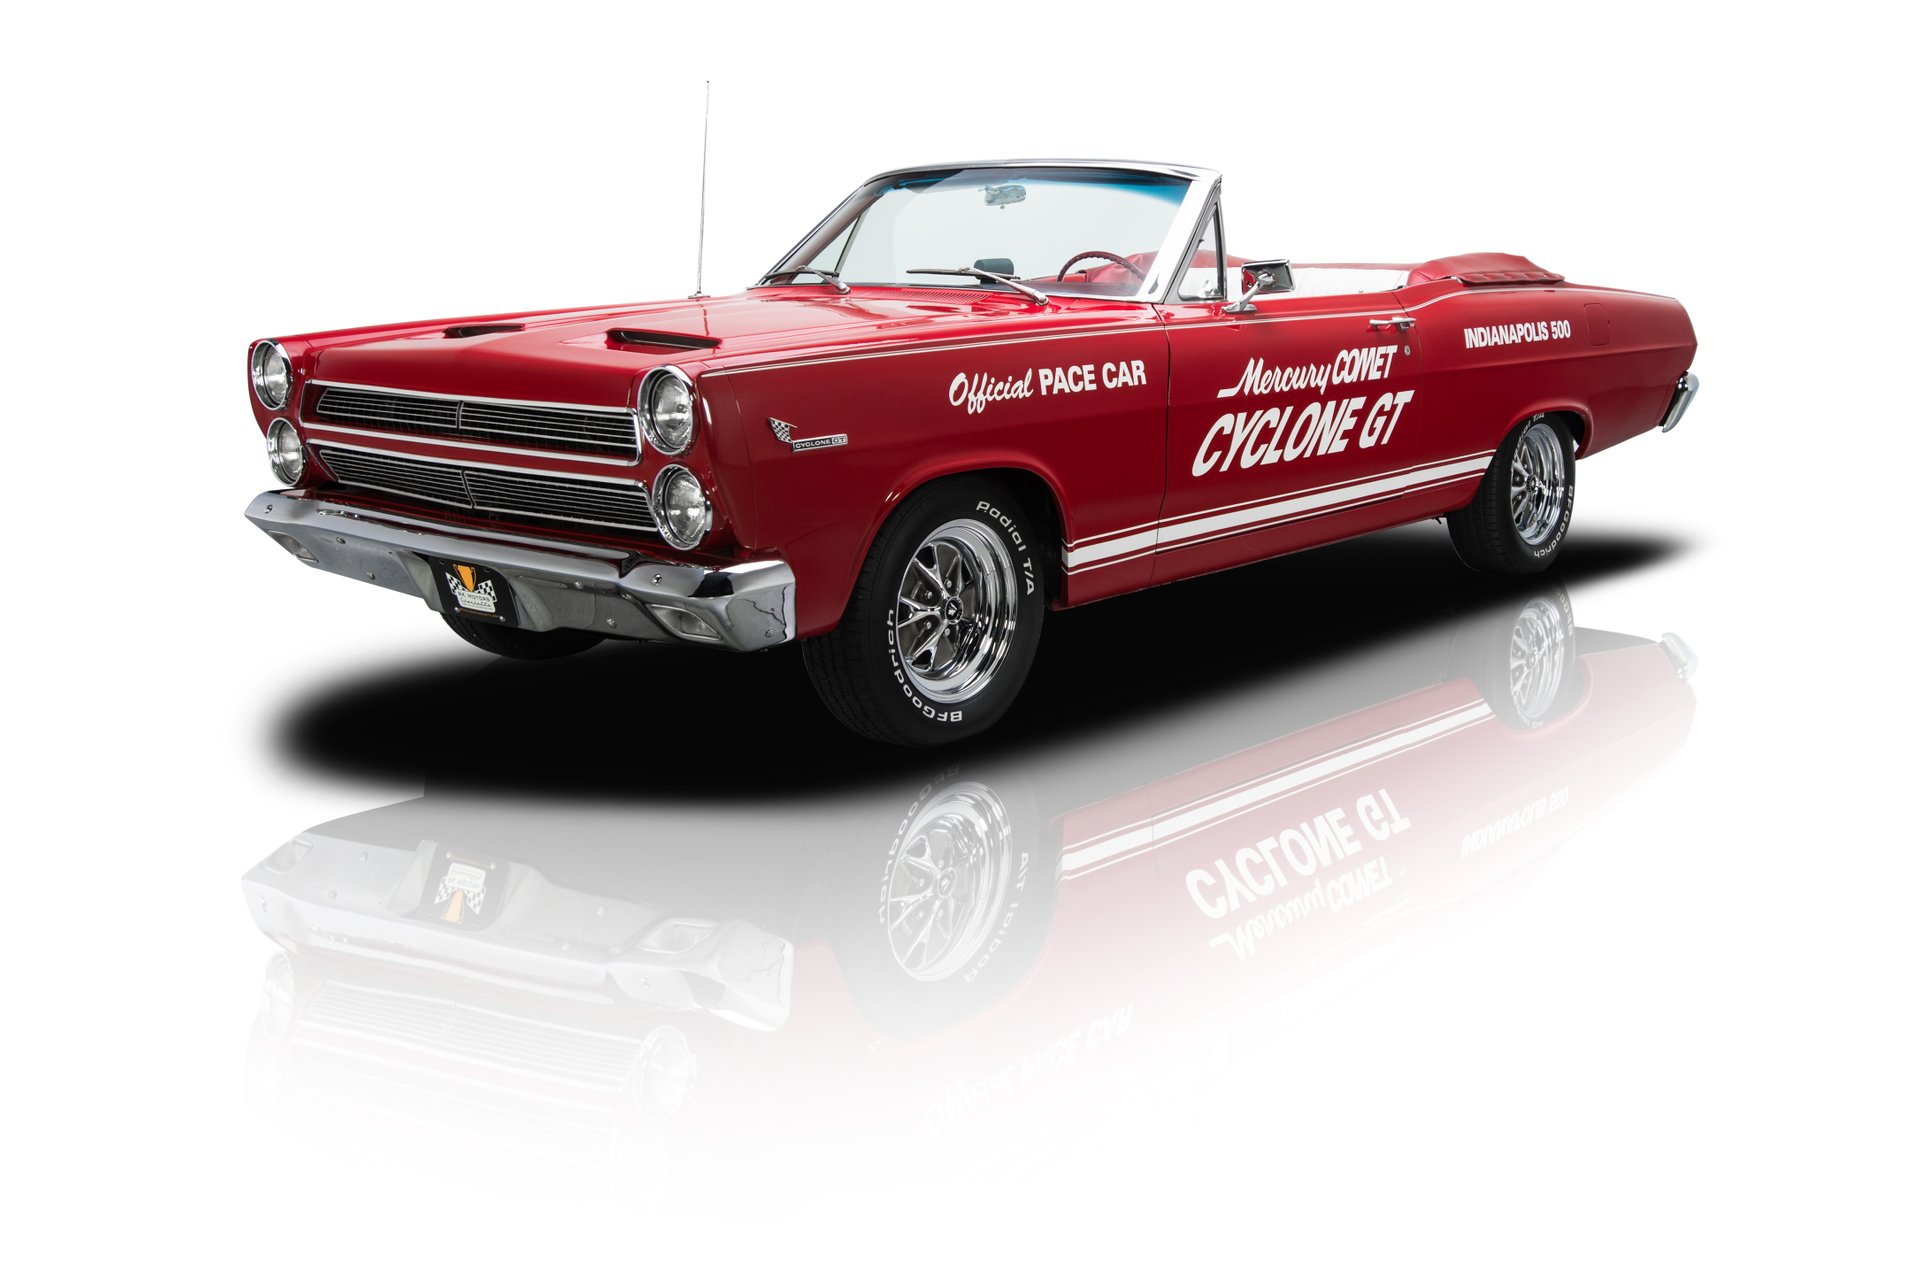 1966 mercury cyclone gt indy 500 pace car